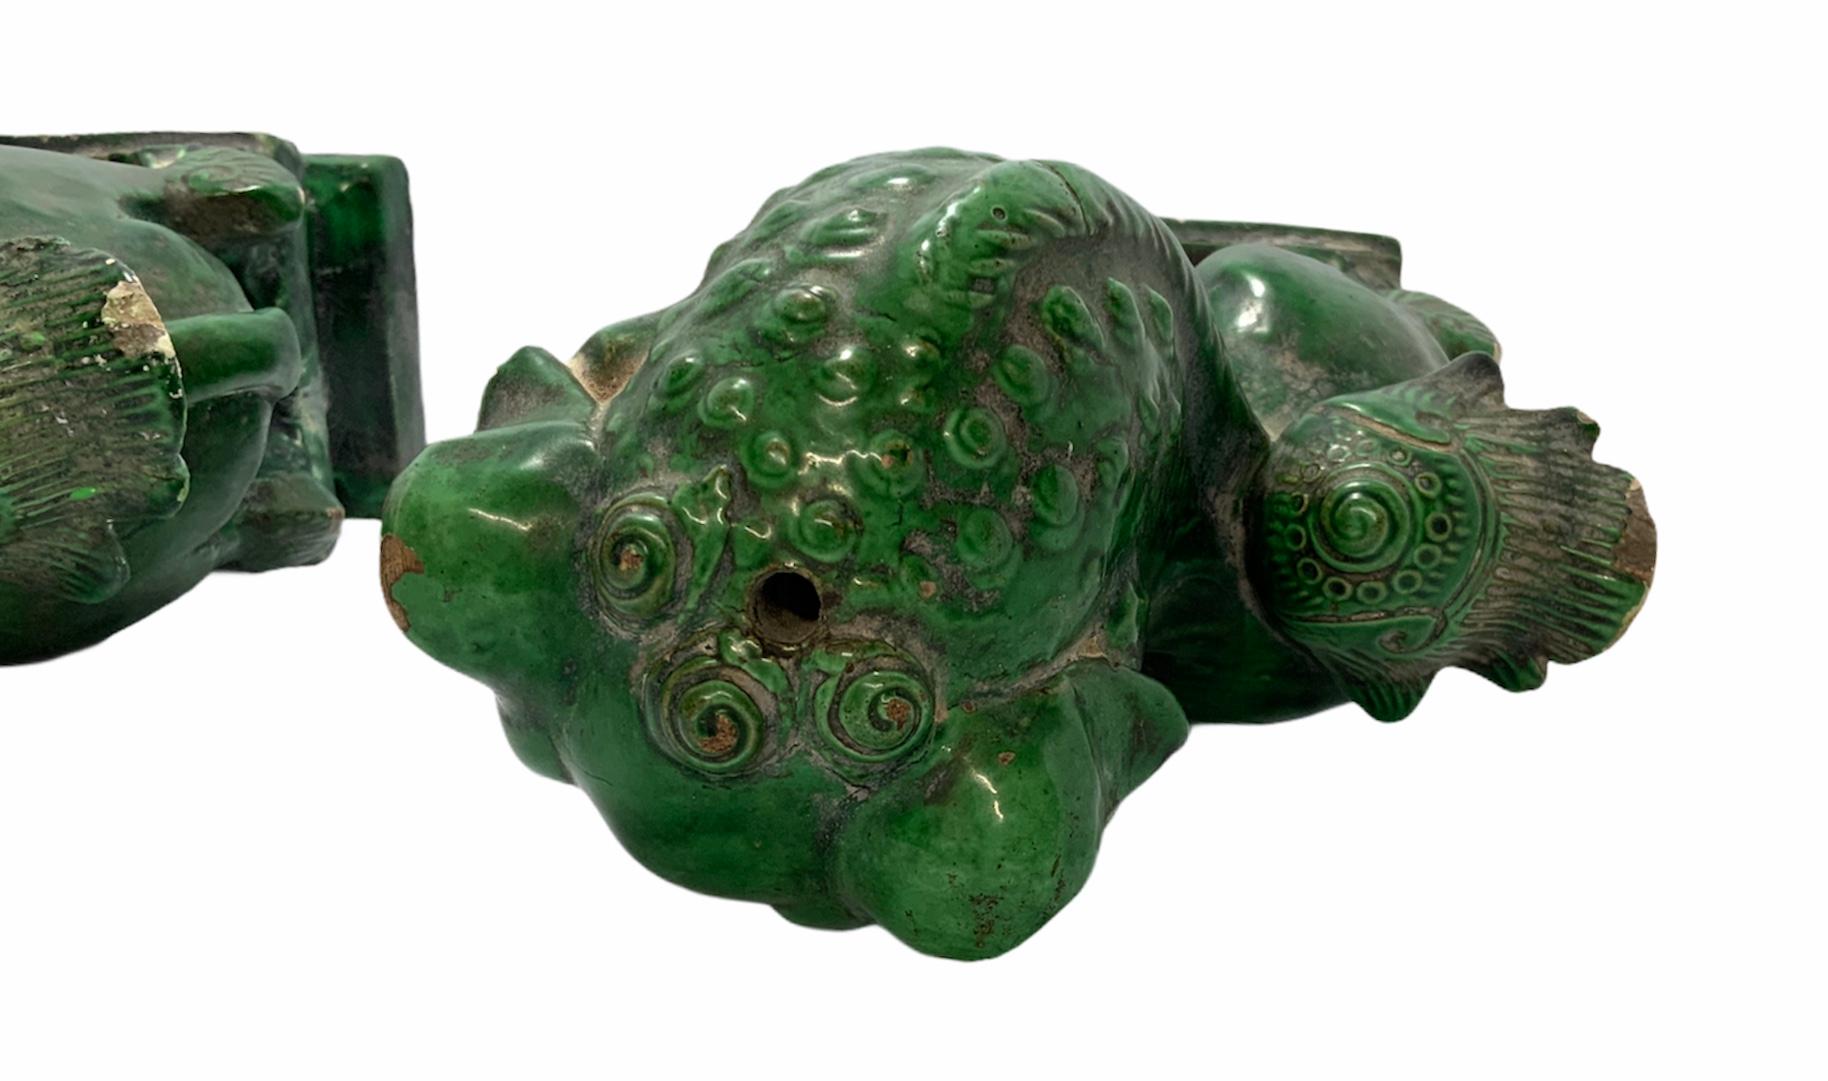 Pair of Chinese Green Ceramic Foo Dogs or Guardian Lions 2